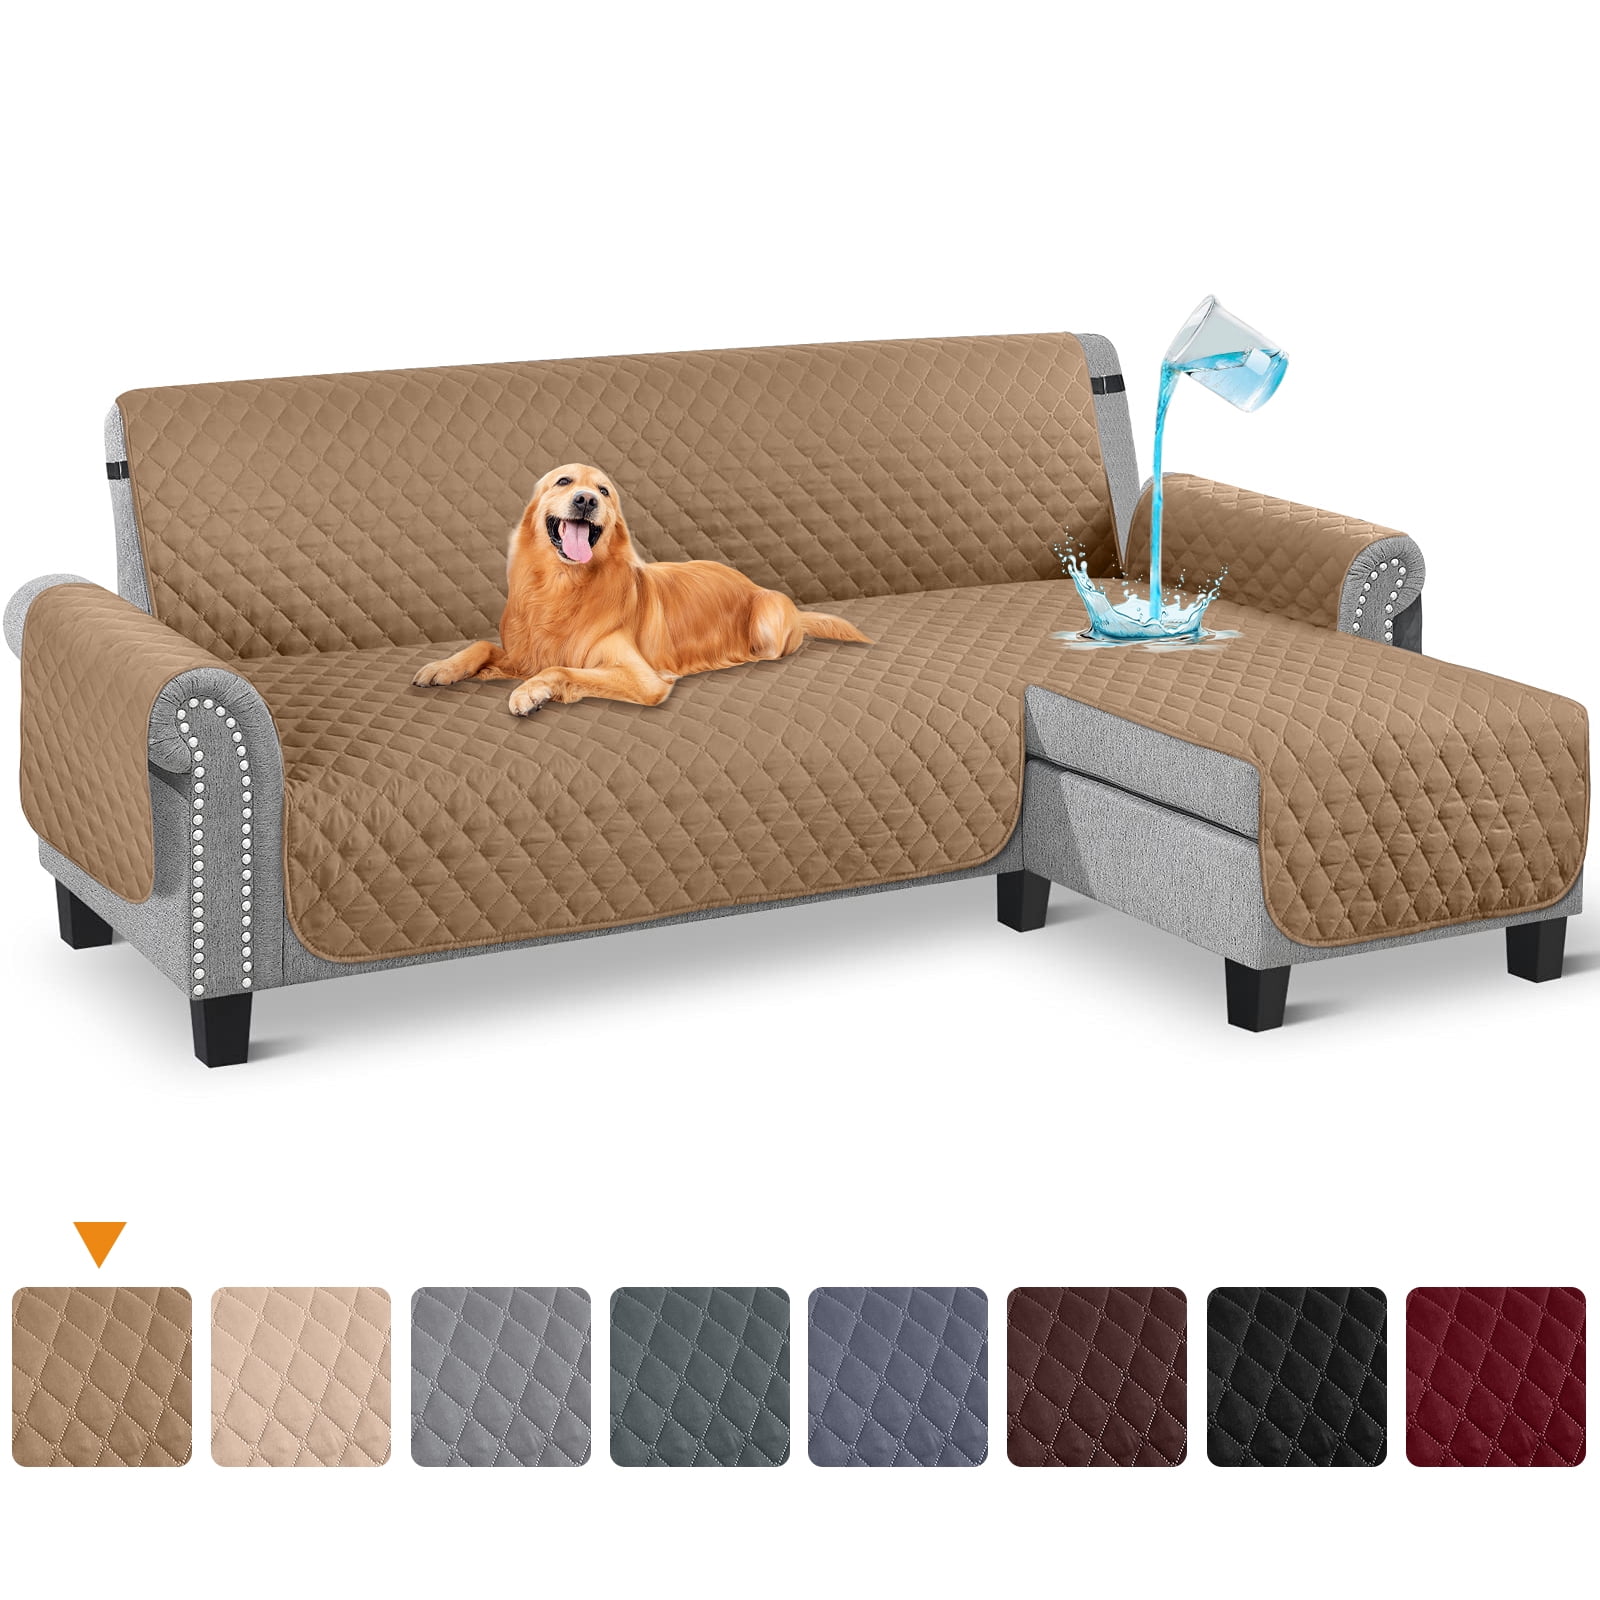 LIANGLAOI Faux Pu Leather Sofa Cover,211% Waterproof Non-Slip Sectional  Couch Cover,Solid Color Sofa Slipcover for Dogs,Children,Pets Furniture